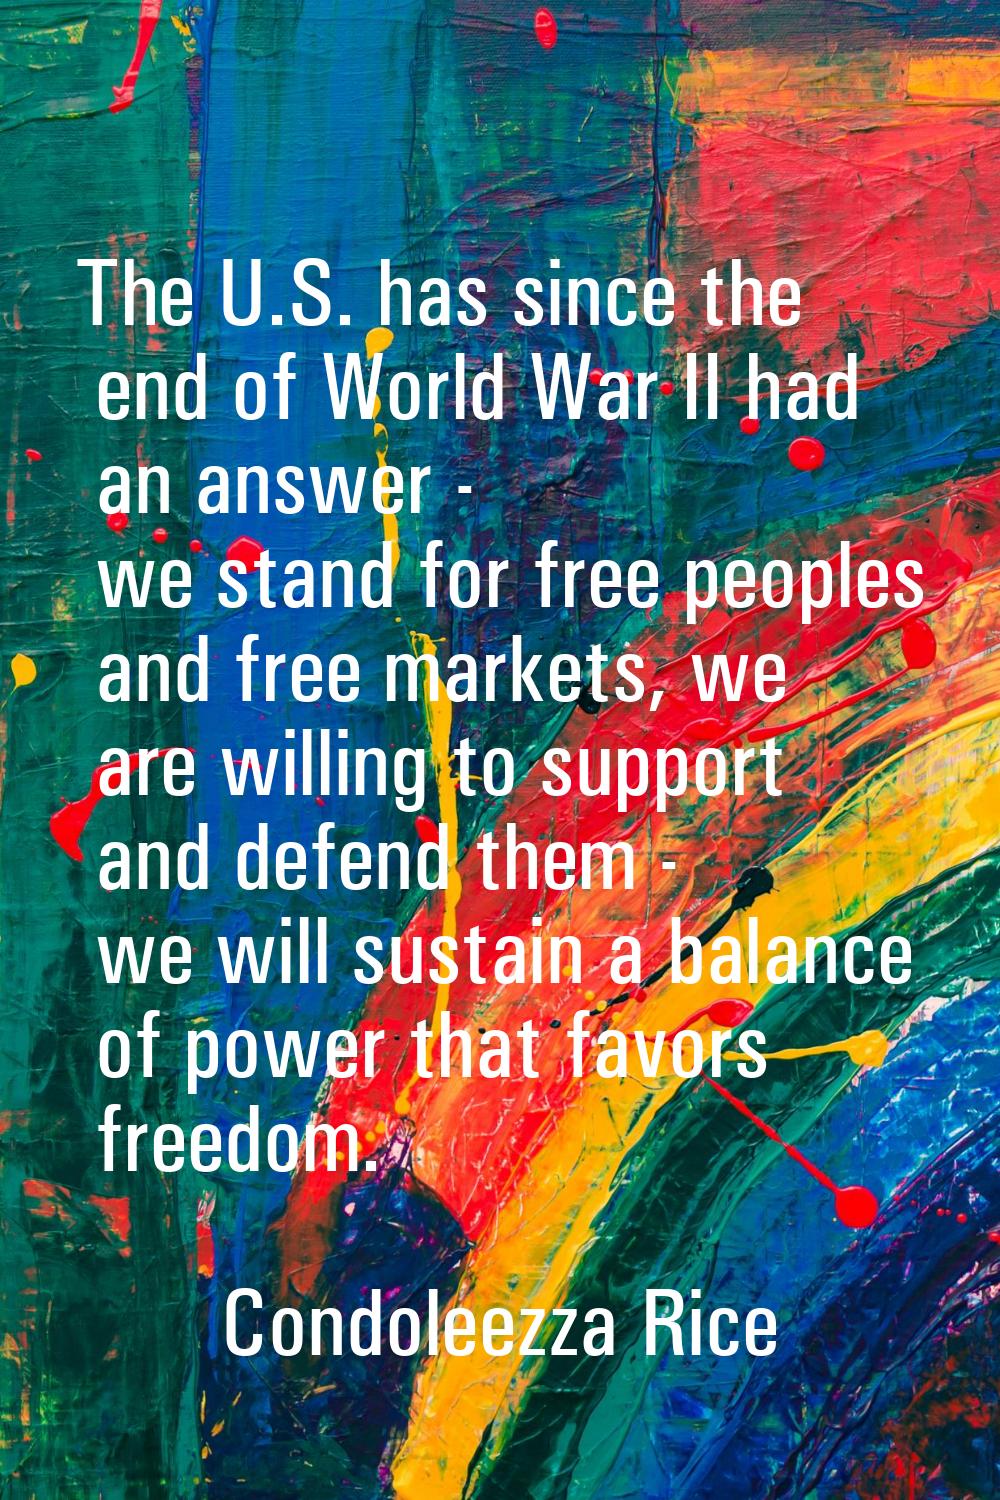 The U.S. has since the end of World War II had an answer - we stand for free peoples and free marke